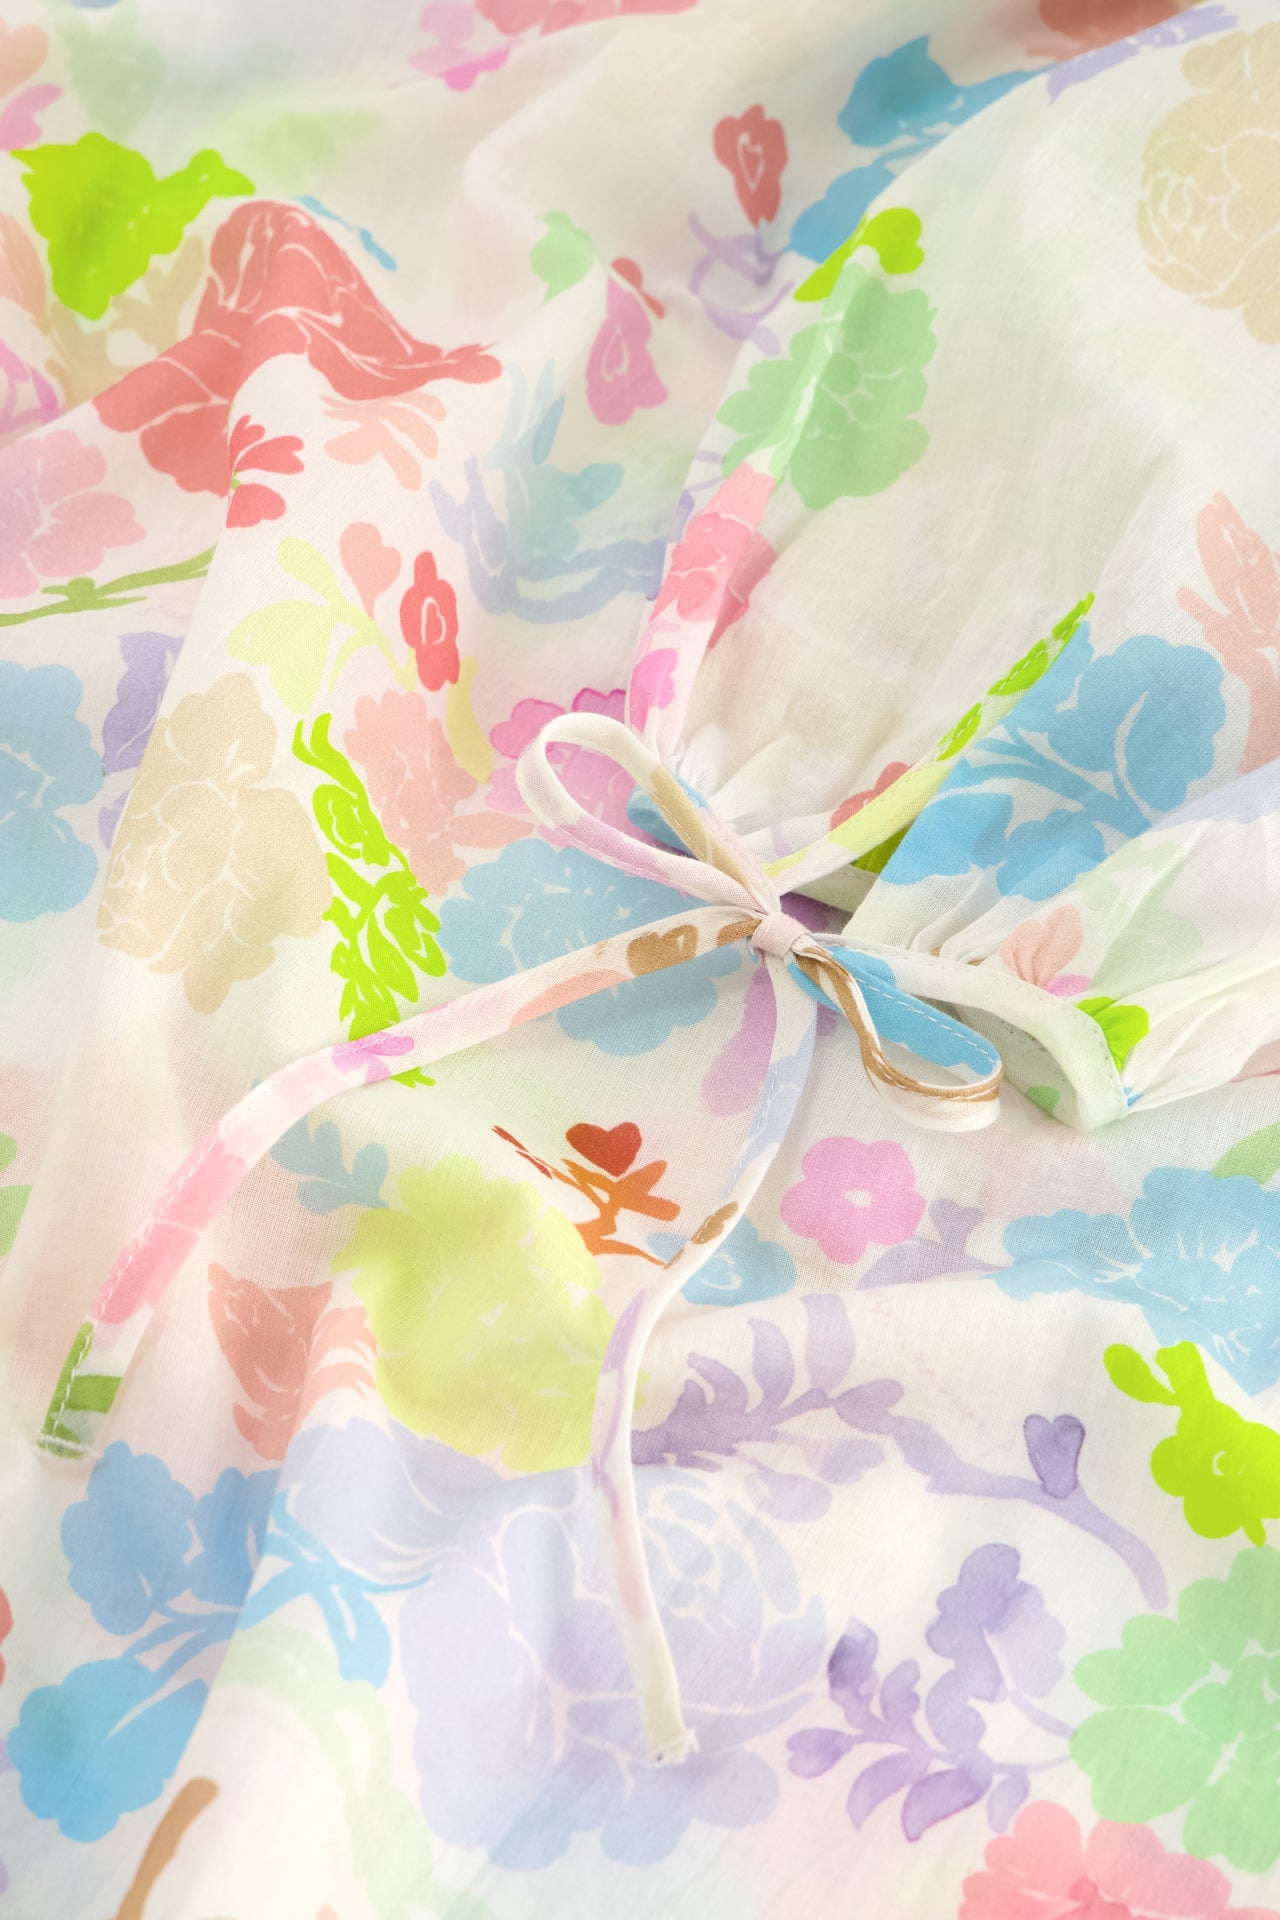 Description: A close up of a flower printed Dover Dress - Caribbean Mini made from organic cotton by Fabienne Chapot.